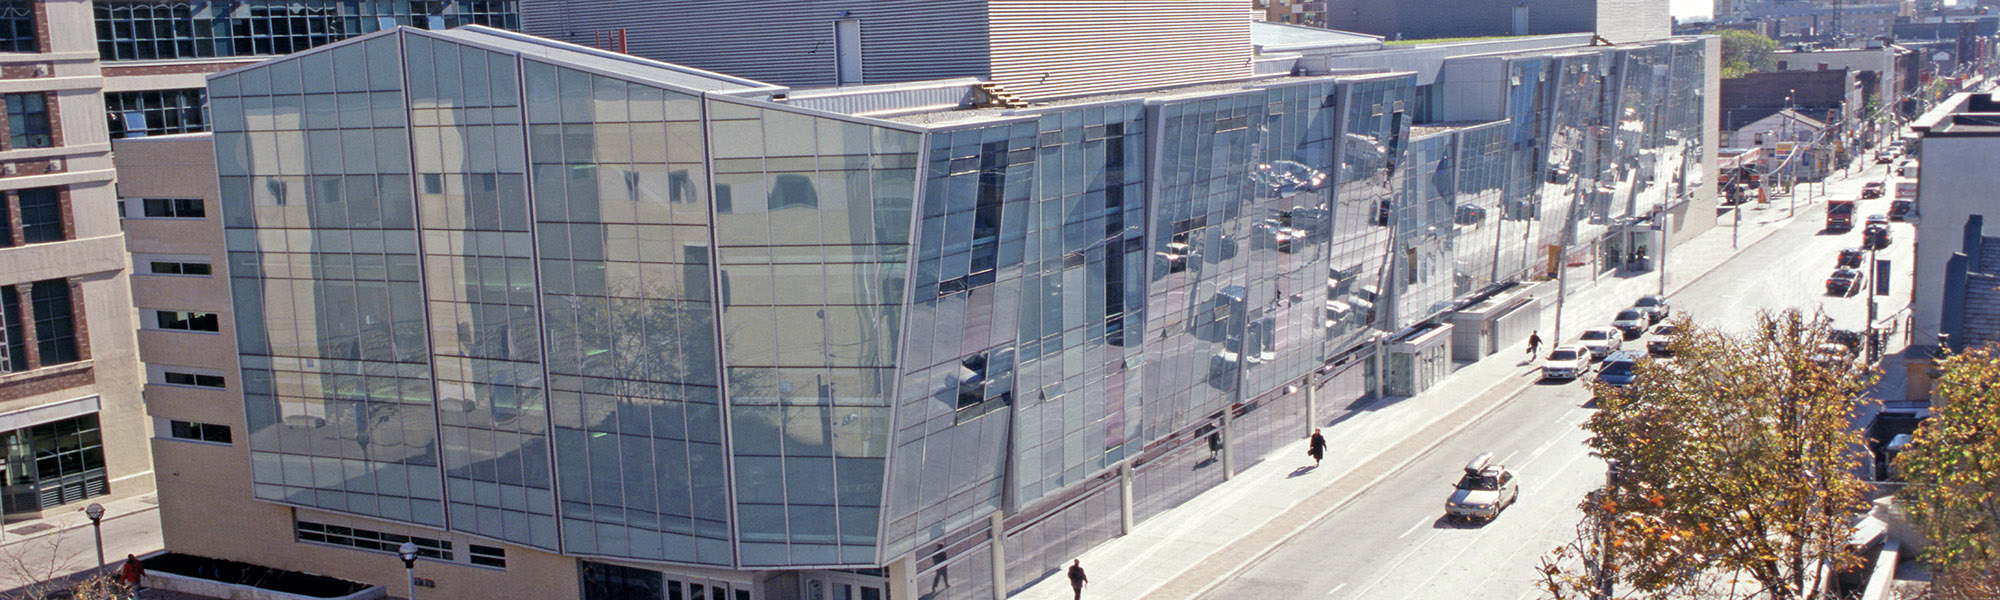 Bird-eye view of the Faculty of Engineering and Architectural science at Ryerson University